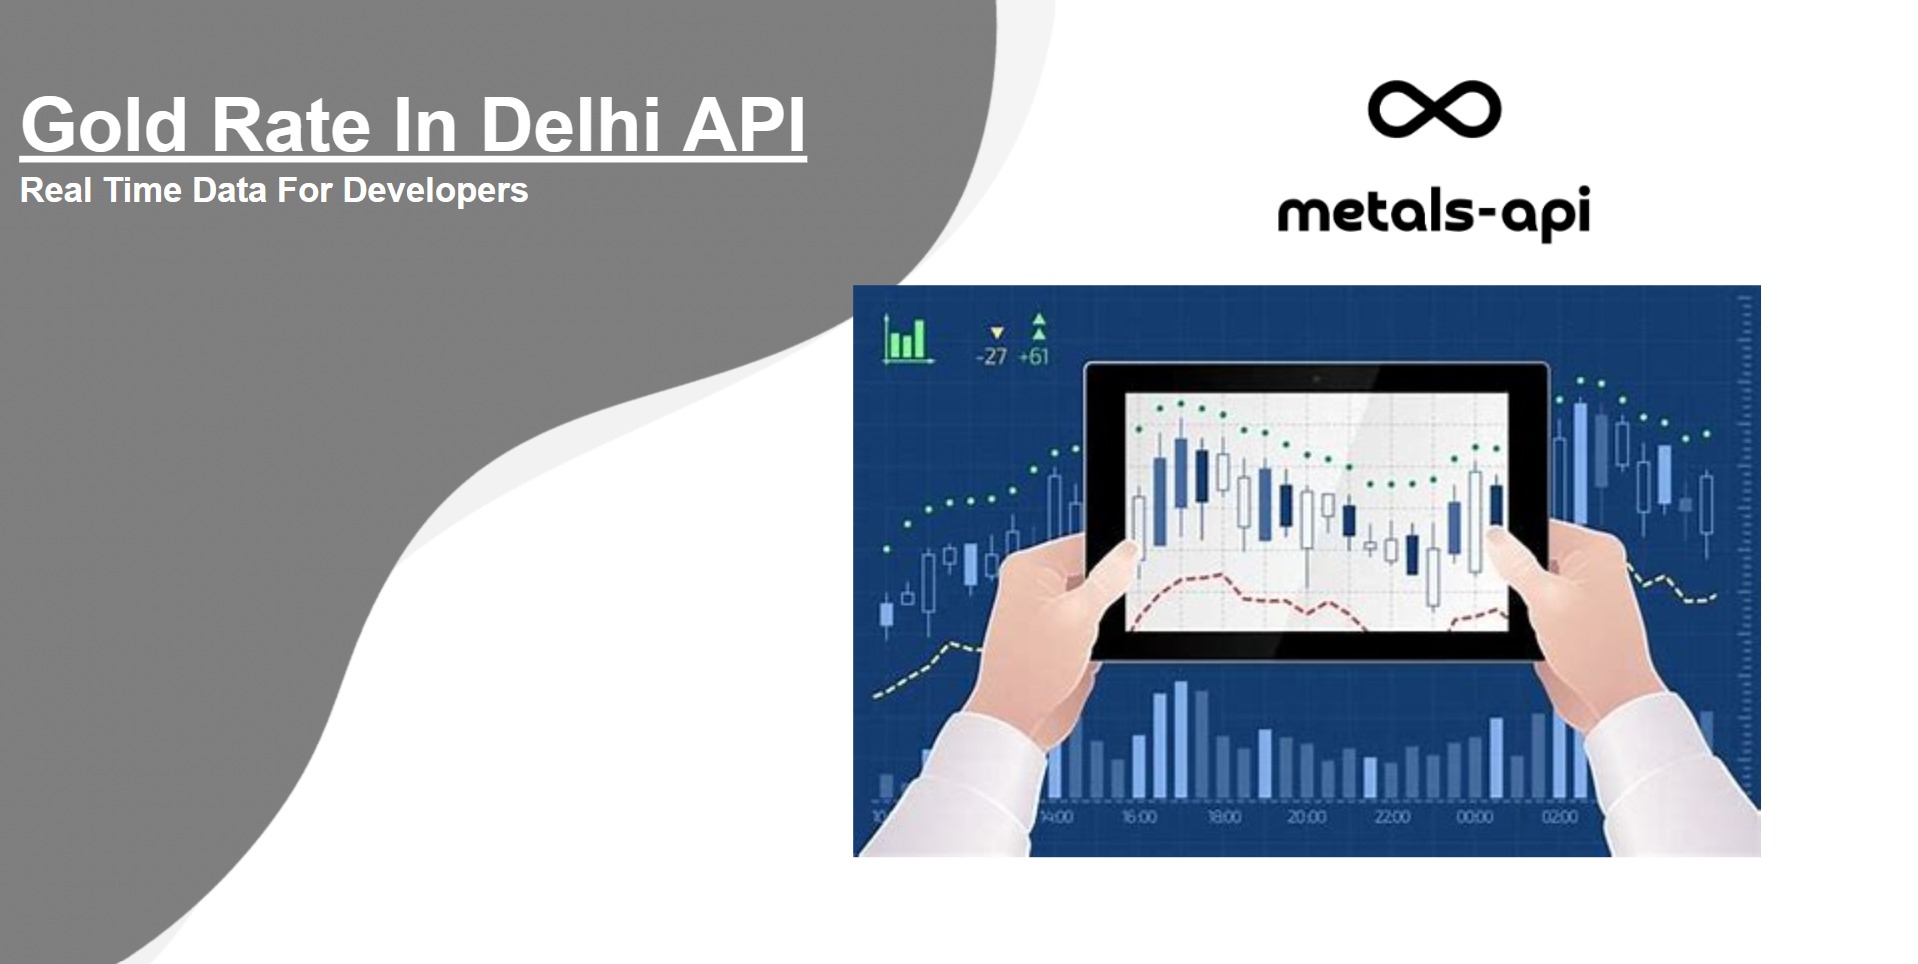 Gold Rate In Delhi API: Real Time Data For Developers